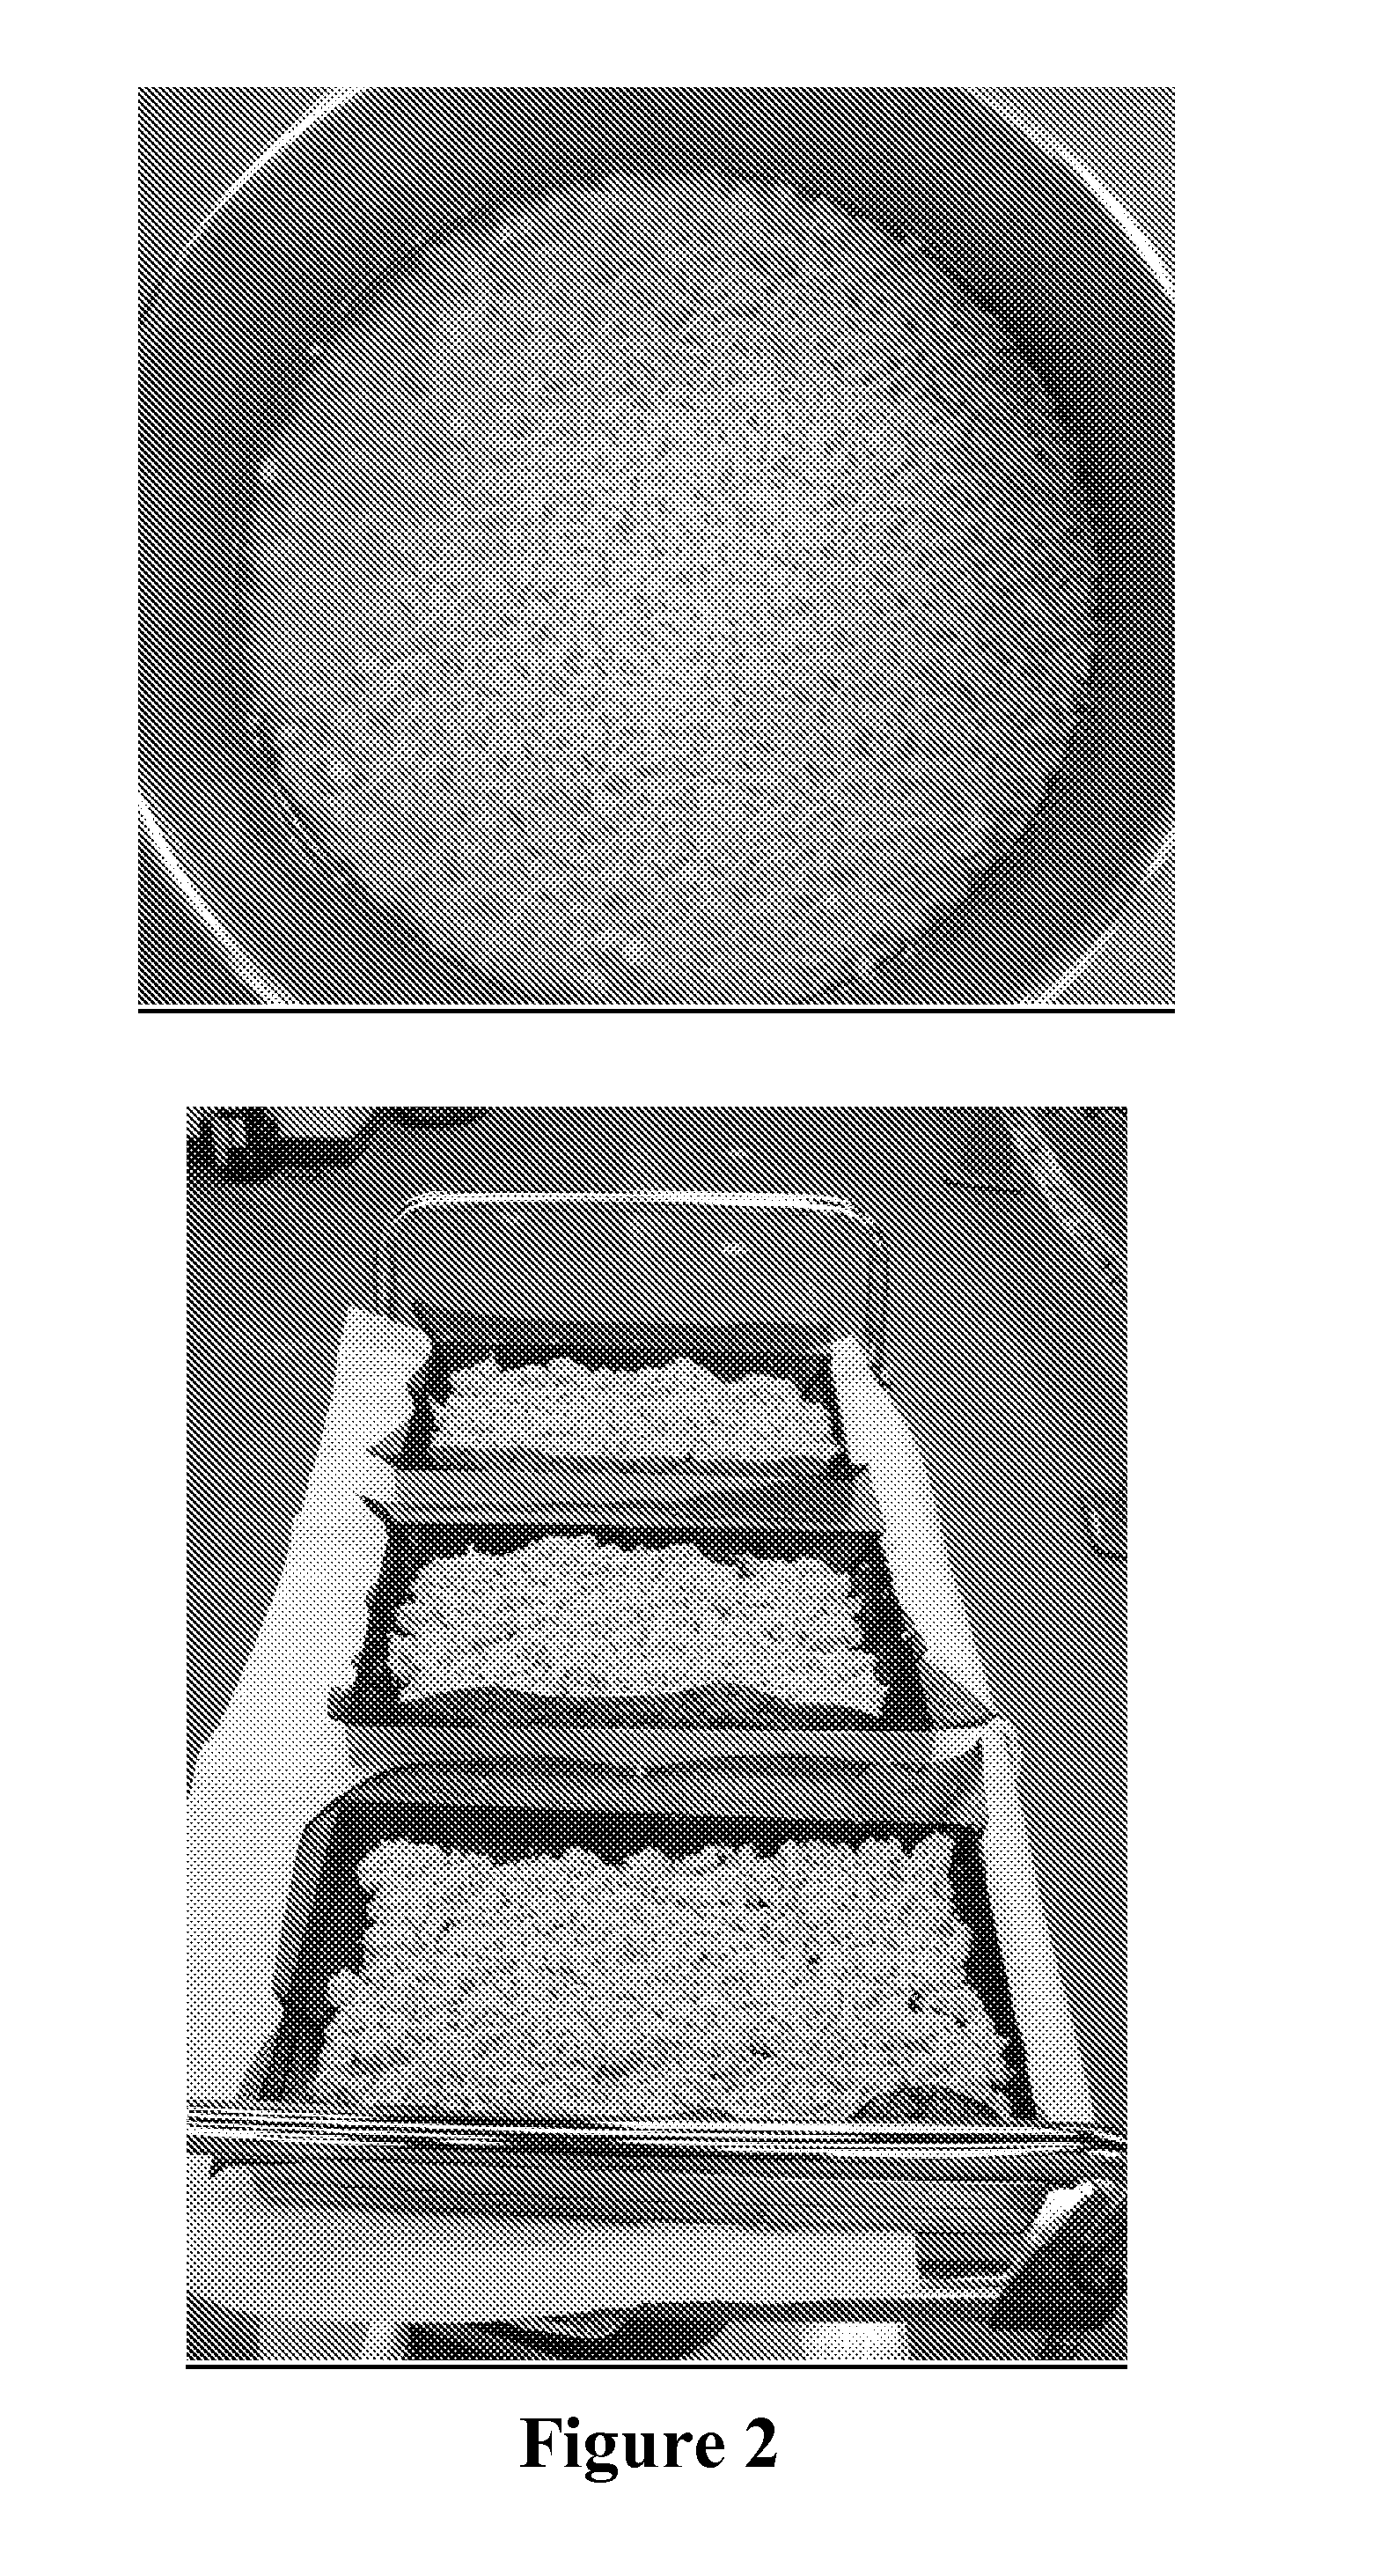 Microparticulated vaccines for the oral or nasal vaccination and boostering of animals including fish